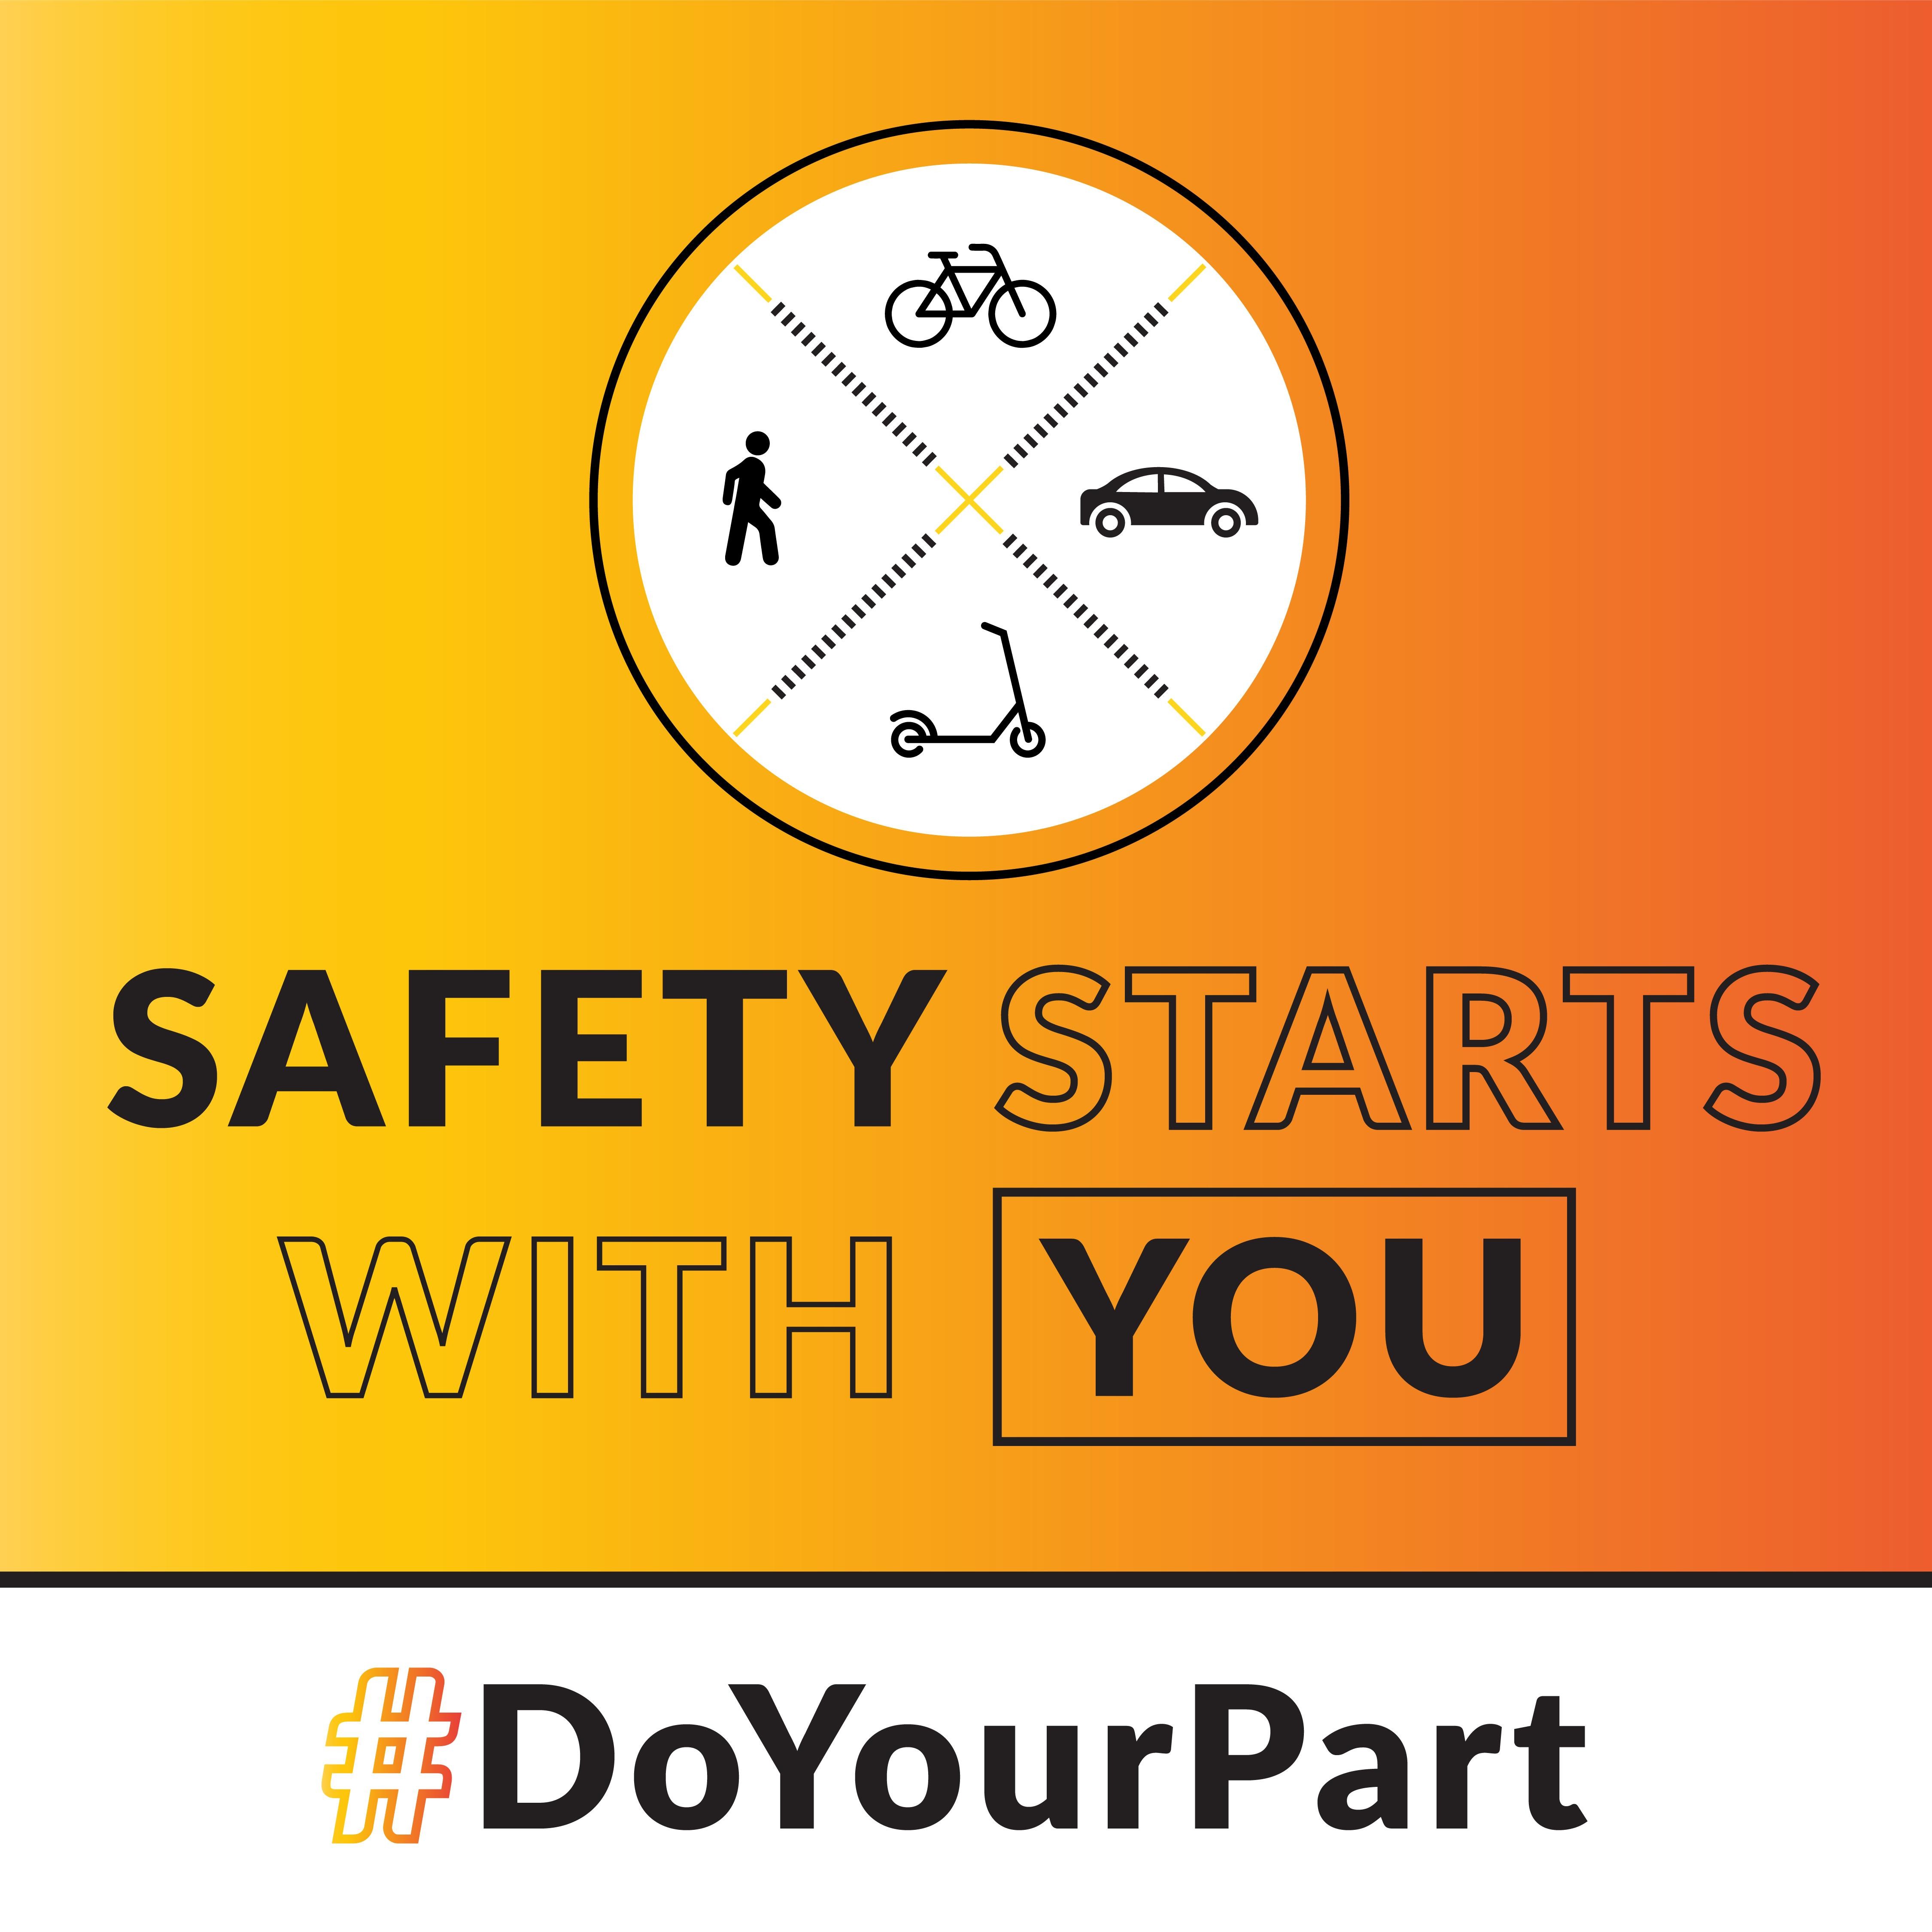 Safety Starts with you